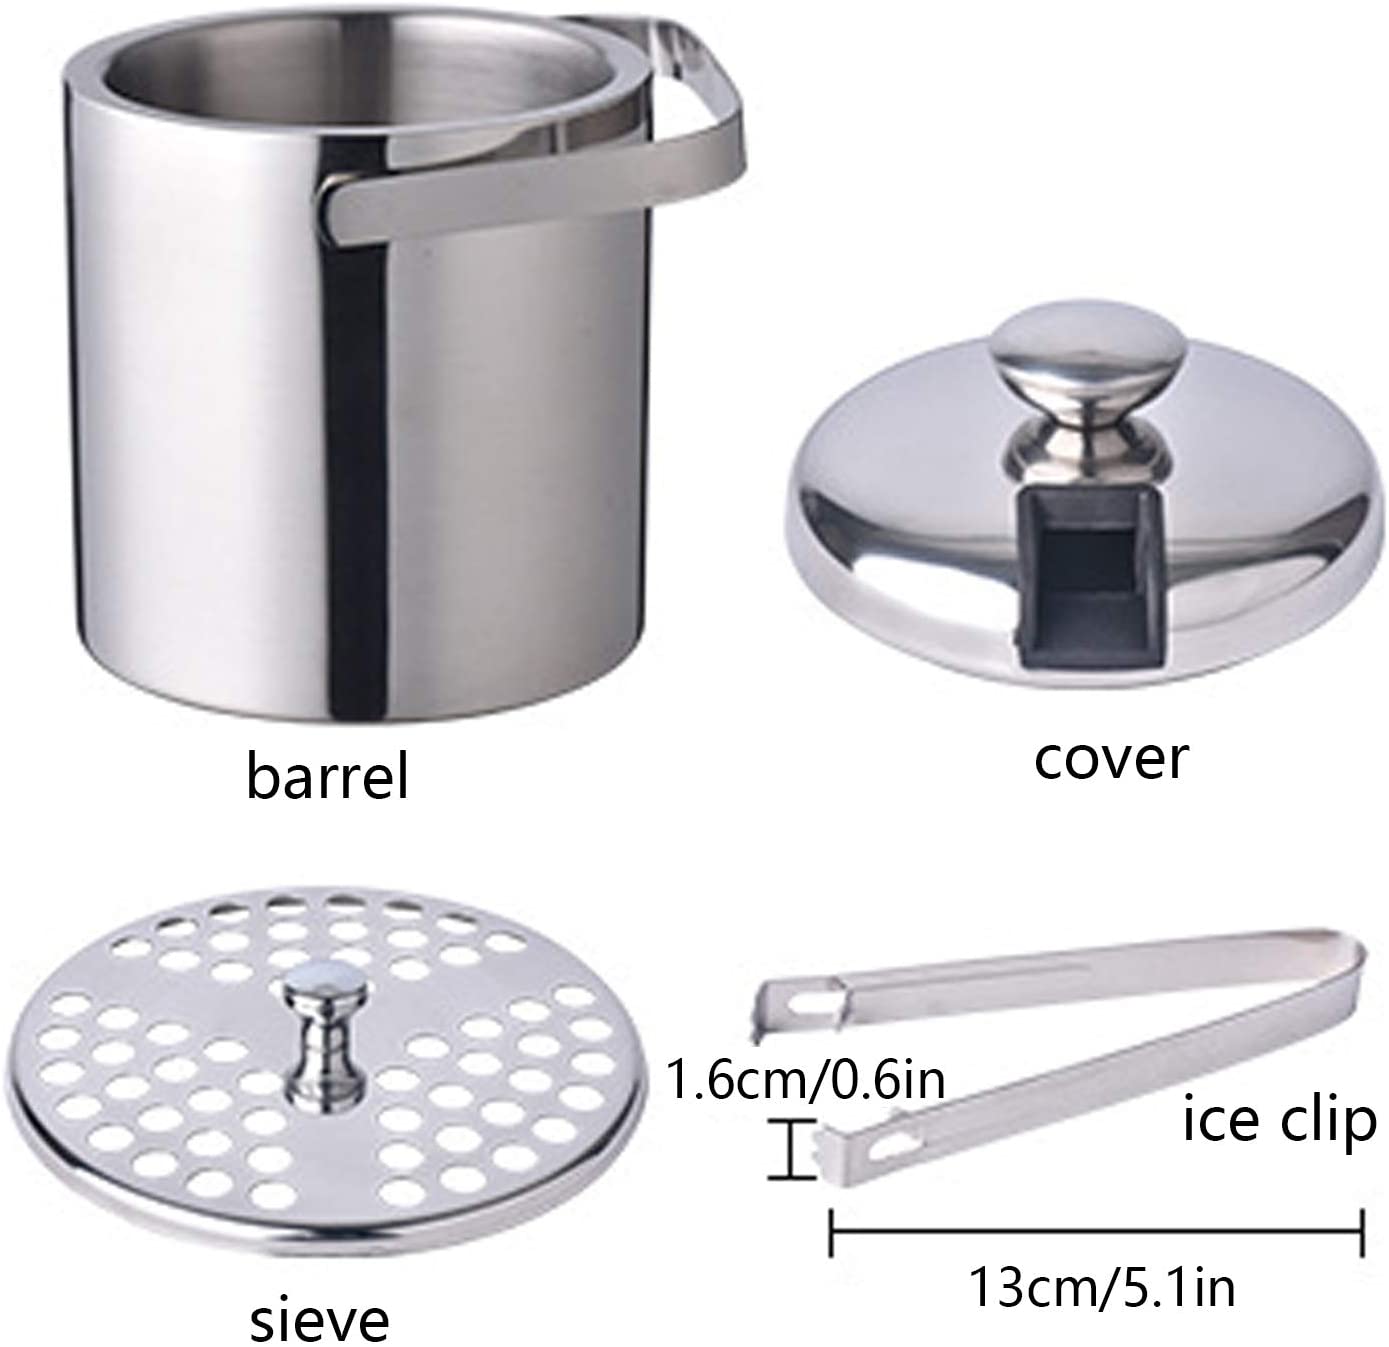 Ice bucket with lid, tongs and sieve, ice bucket specifications for cocktail bars